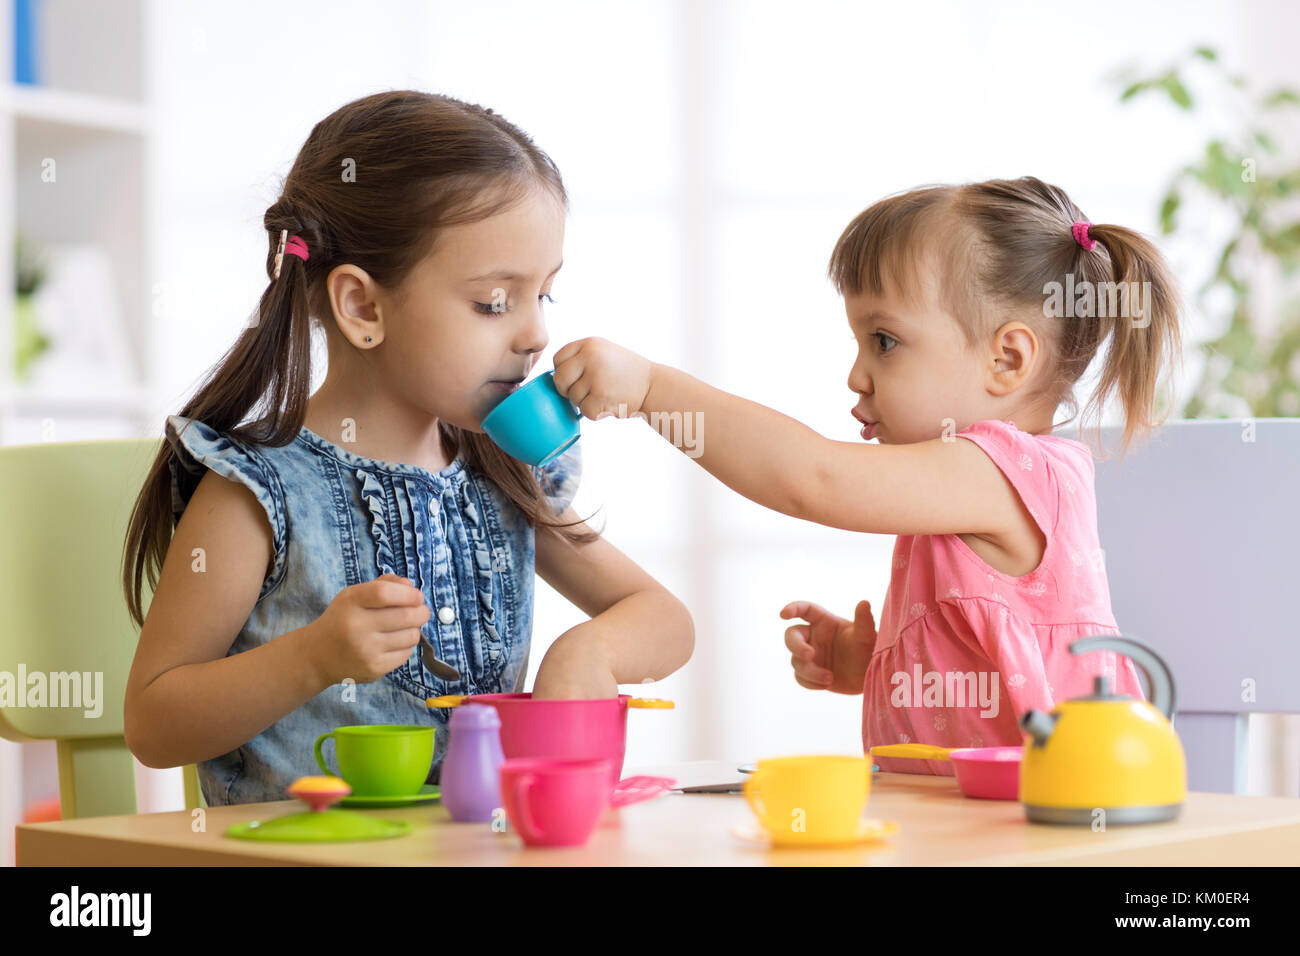 Kids playing with plastic tableware Stock Photo